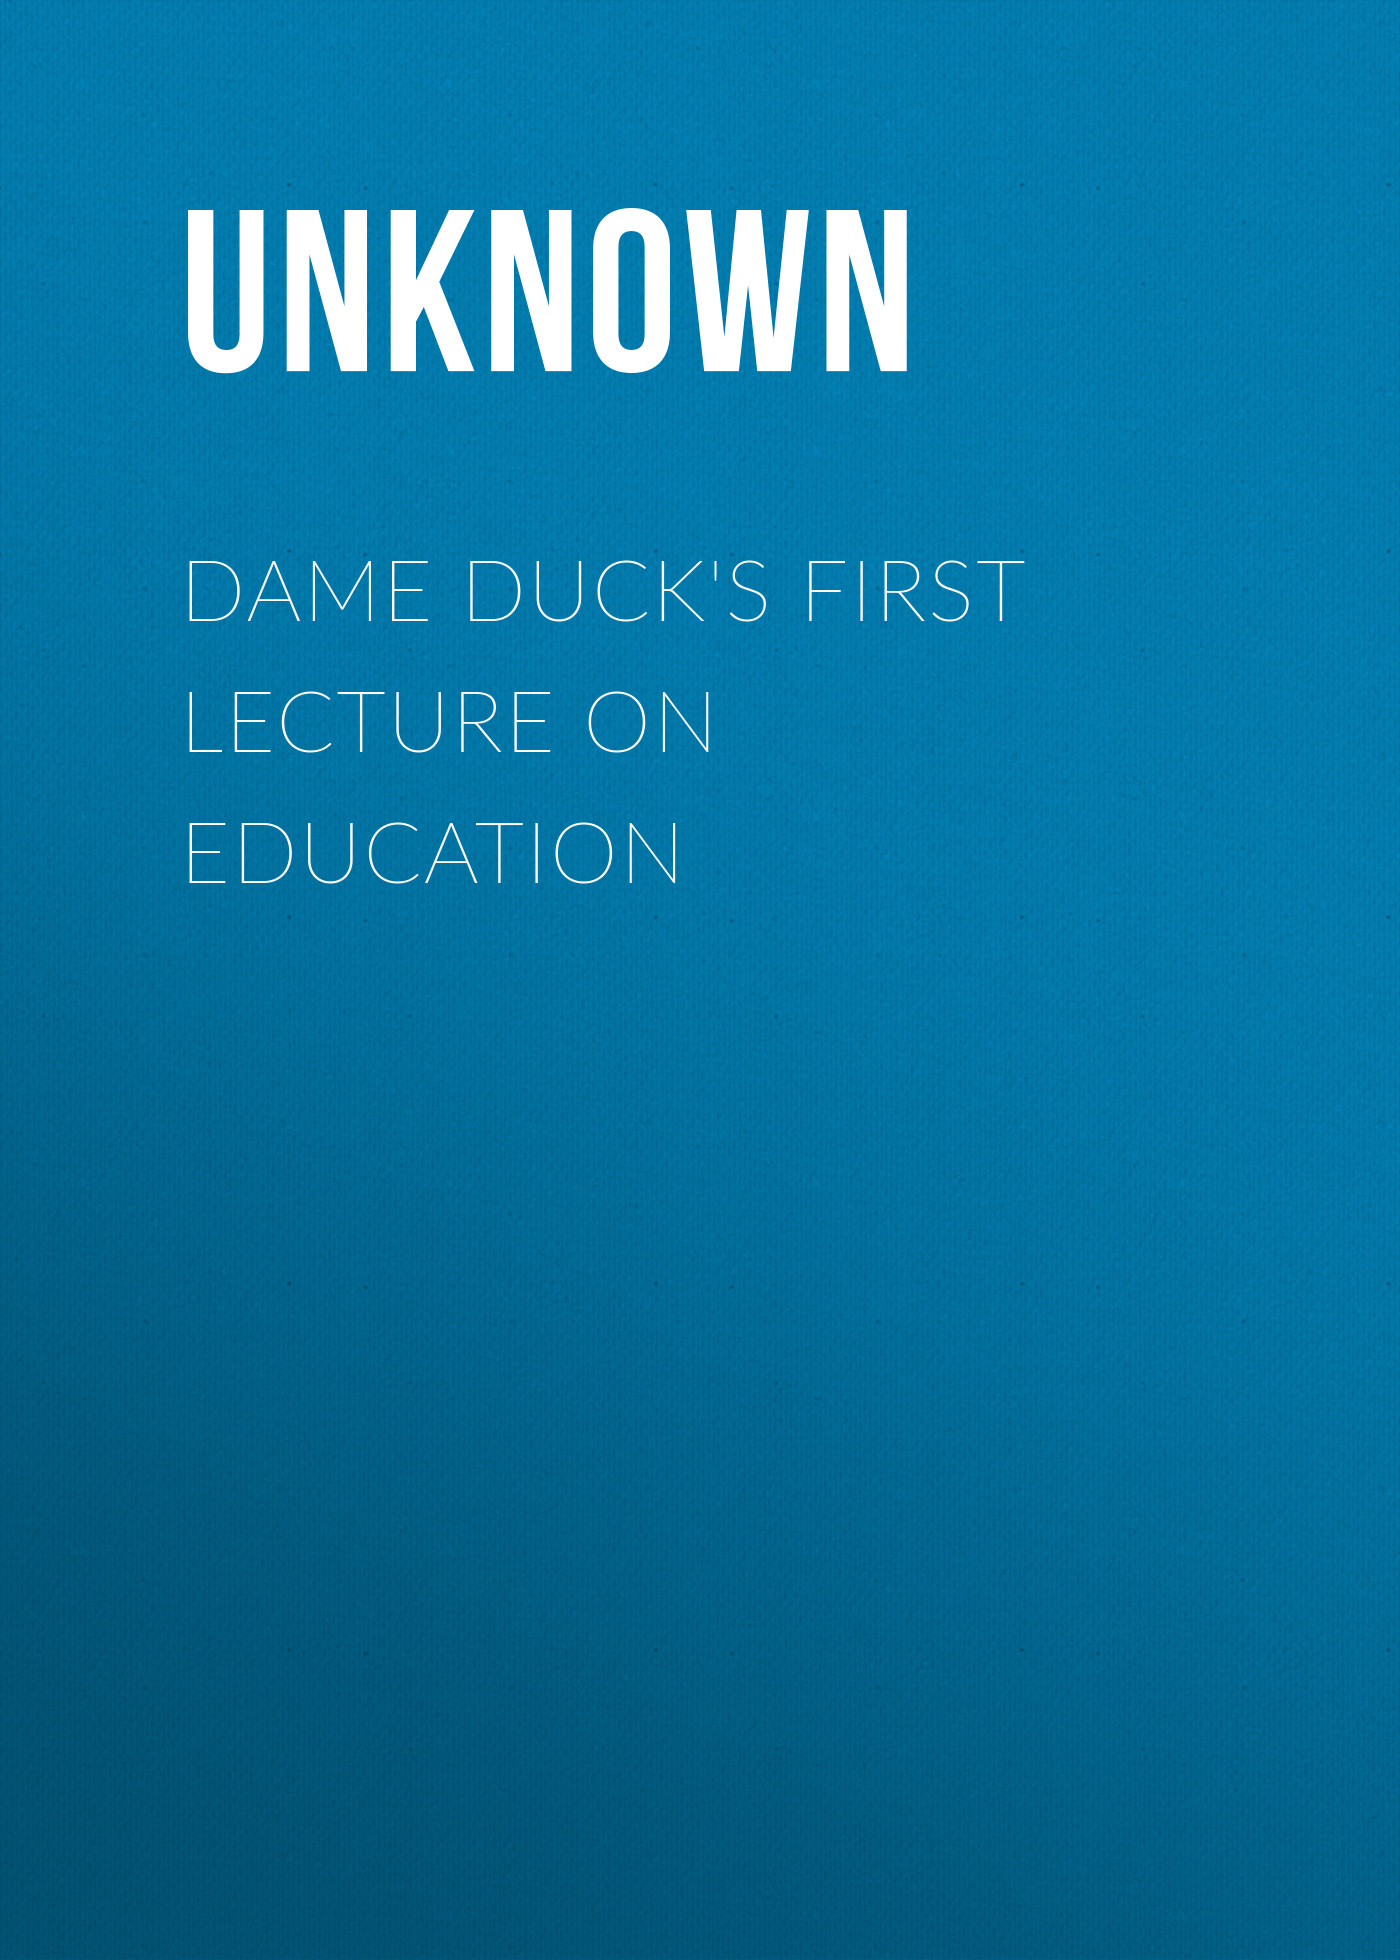 Dame Duck's First Lecture on Education